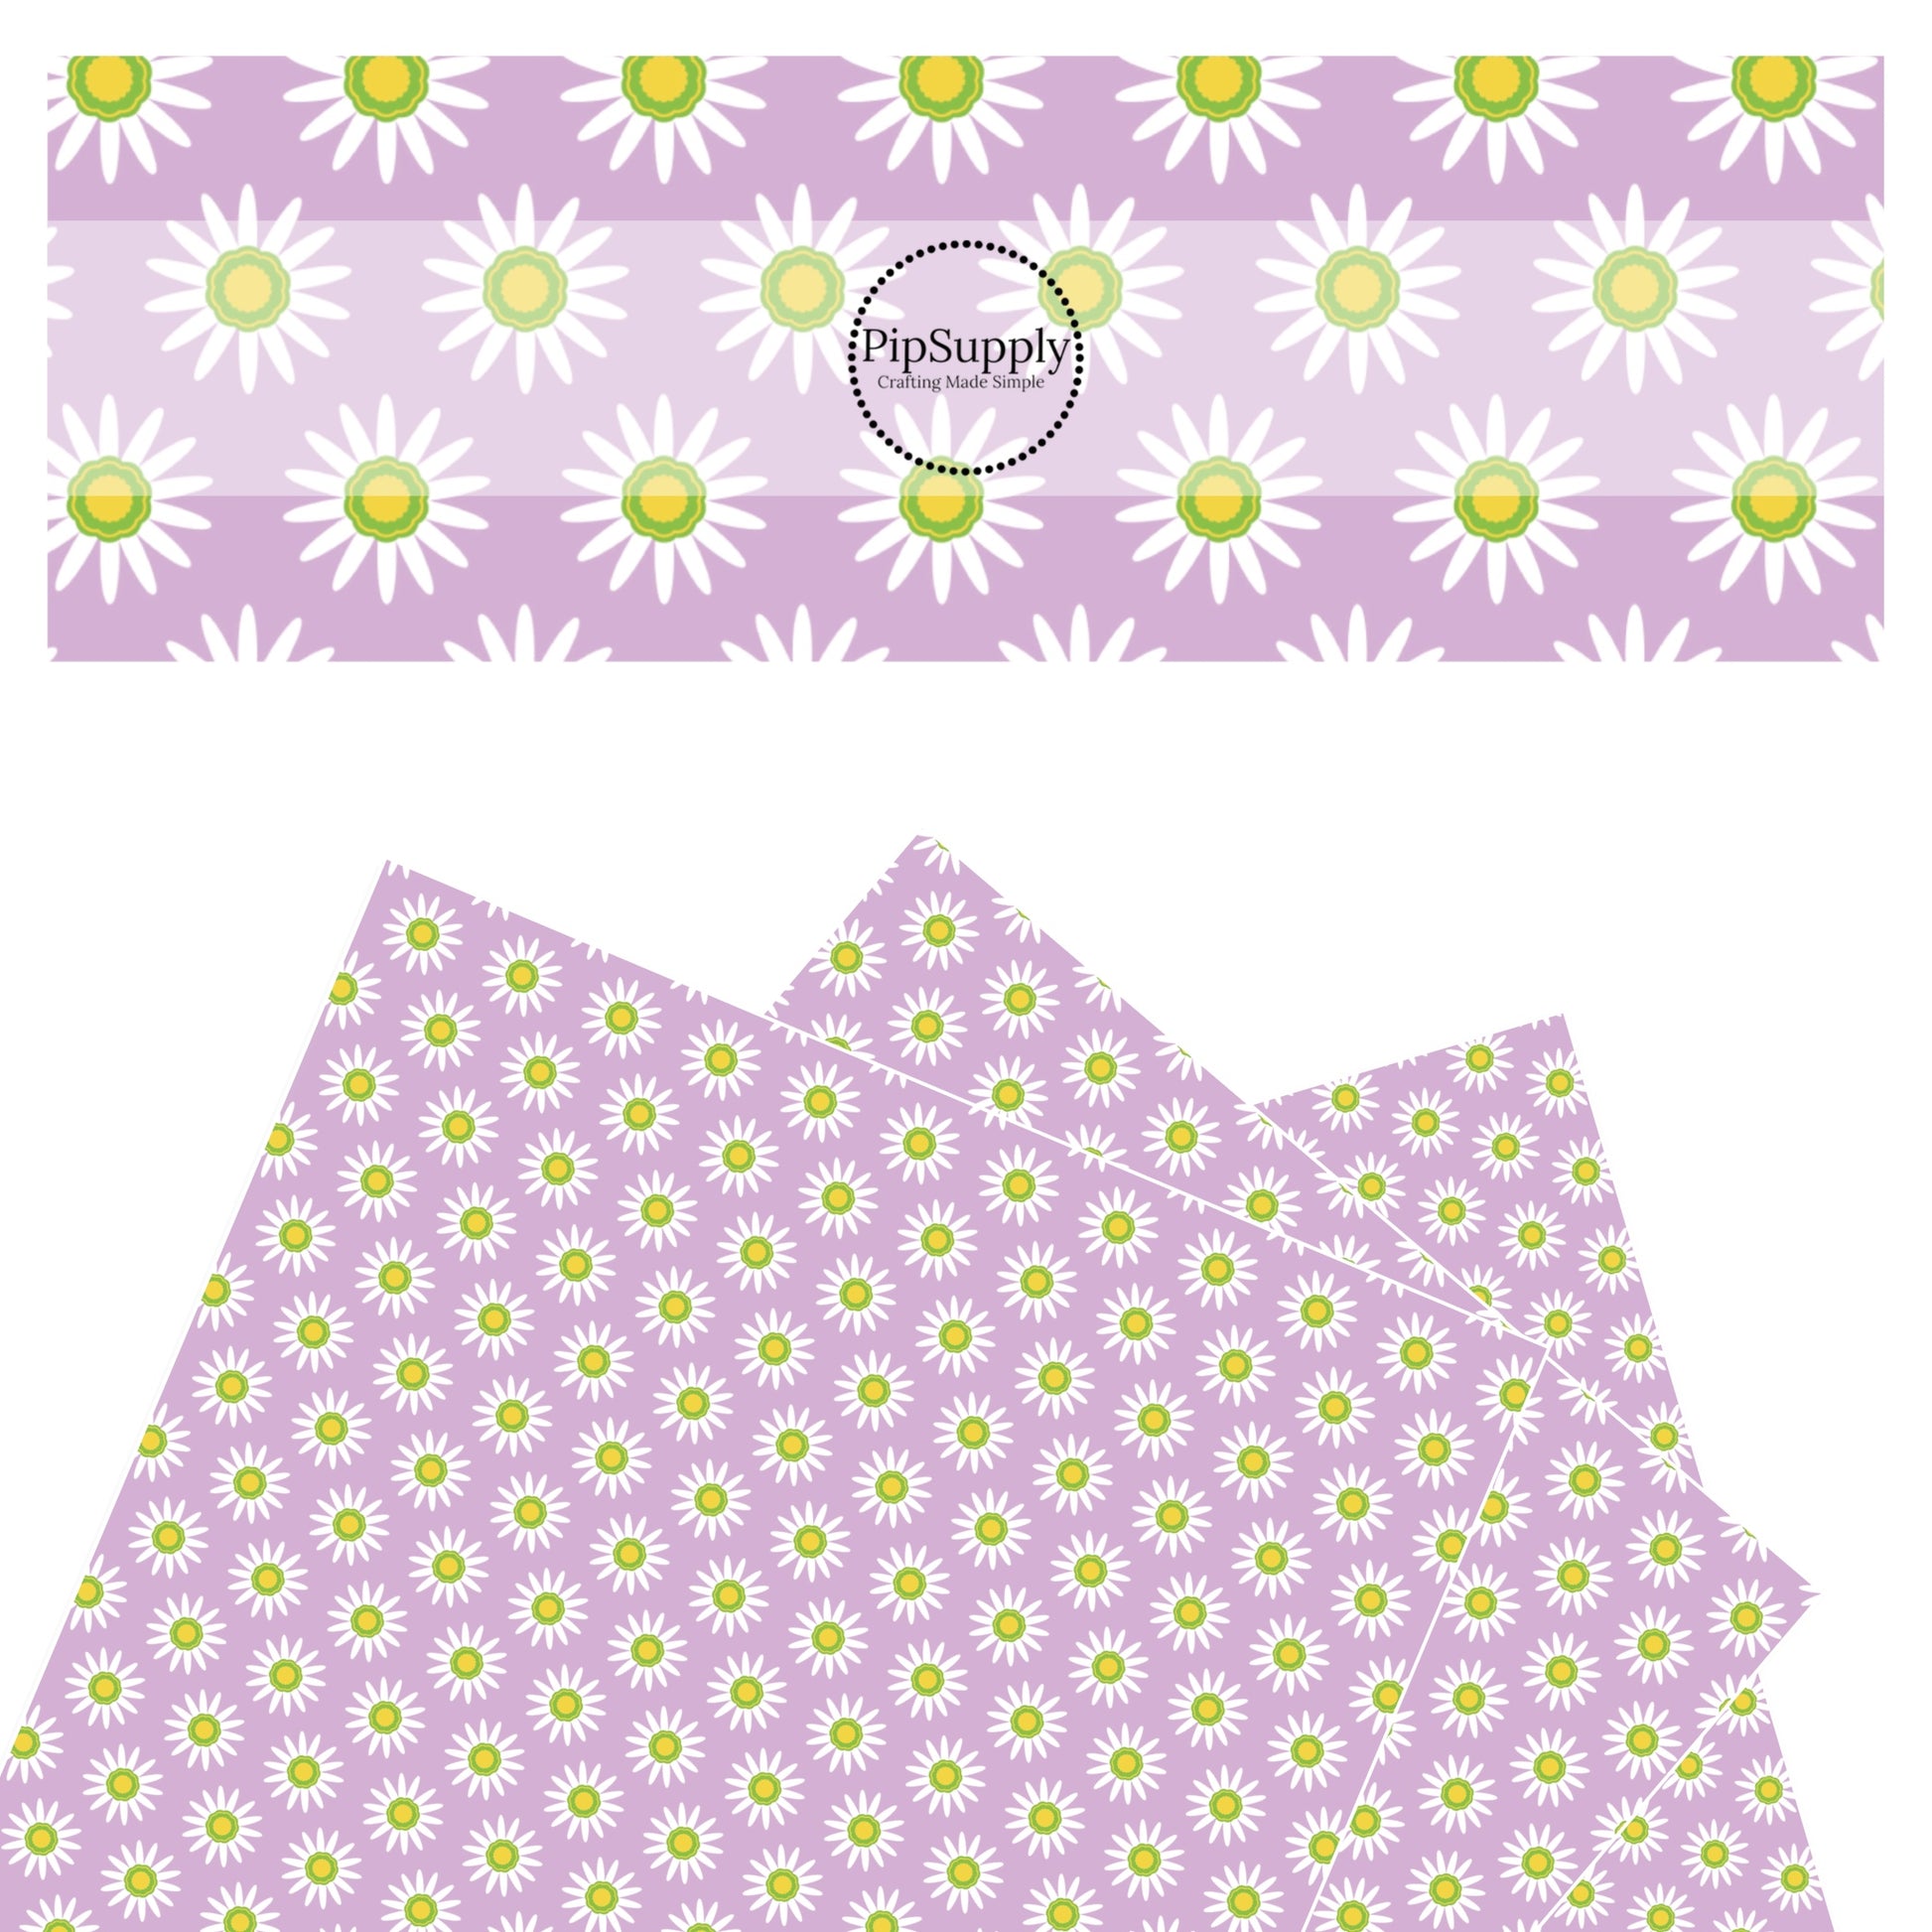 White flowers with green and yellow center on purple faux leather sheets